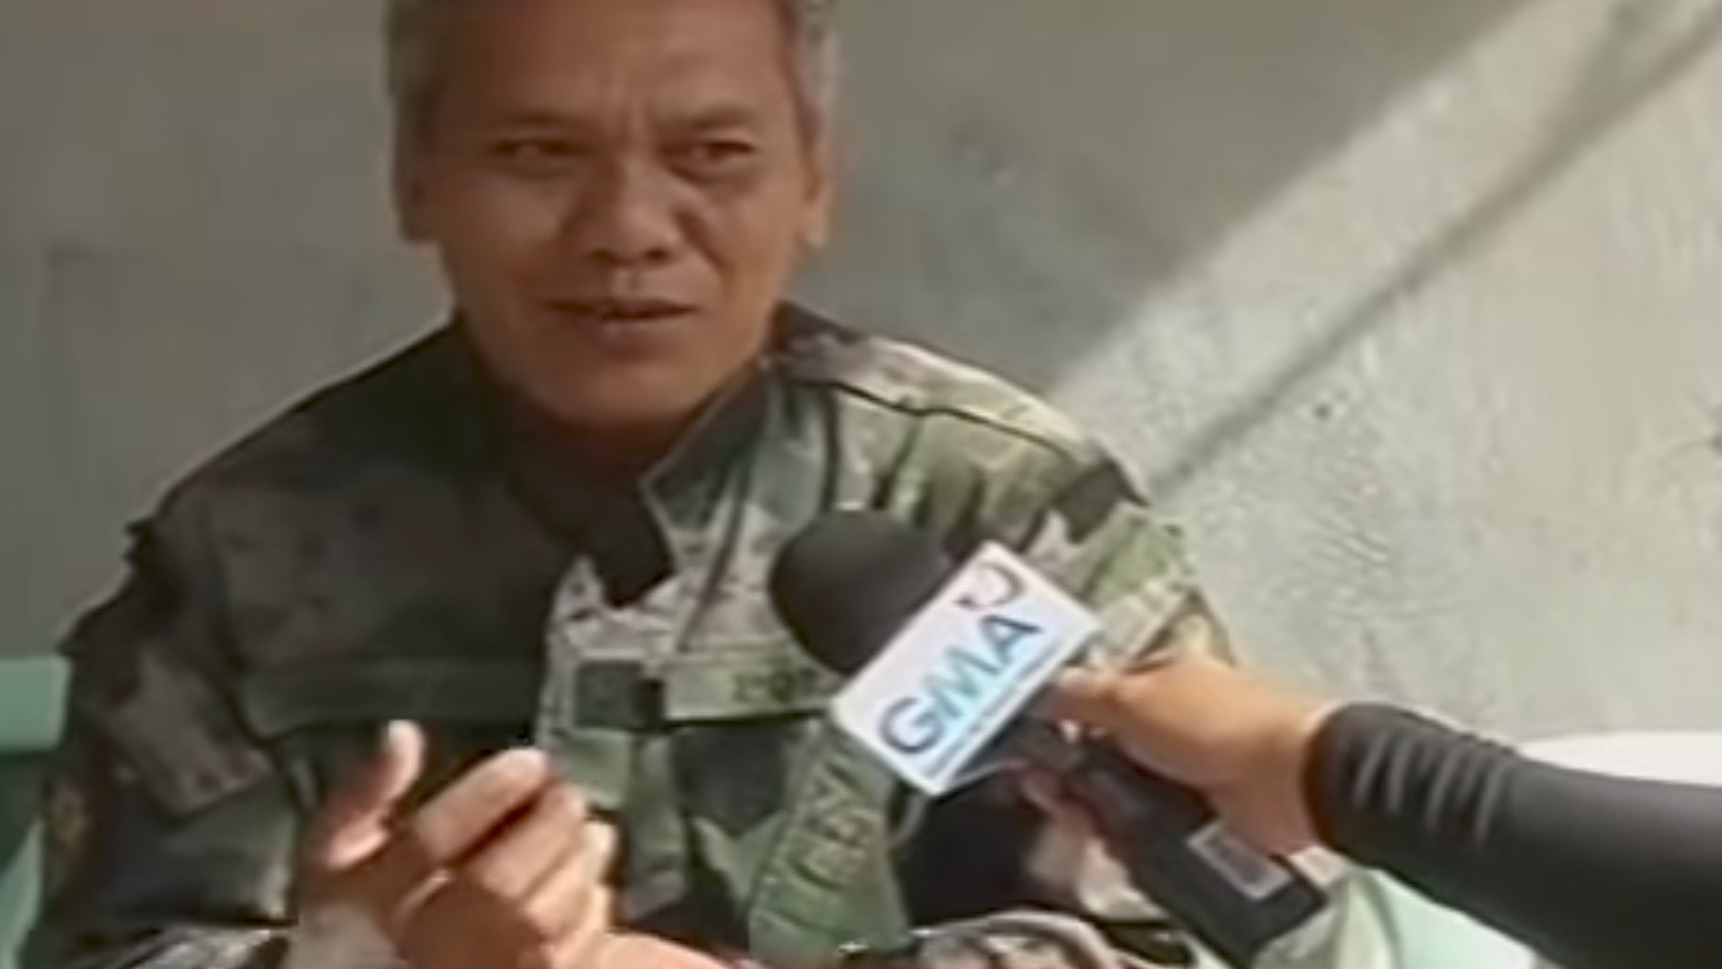 Police Officer 3 Isah Sangcad from the Autonomous Region of Muslim Mindanao – Regional Public Safety Battalion (ARMM-RPSB) is being called by his colleagues as “the man that defied Science”. PHOTO: Screengrab from 24 Oras footage